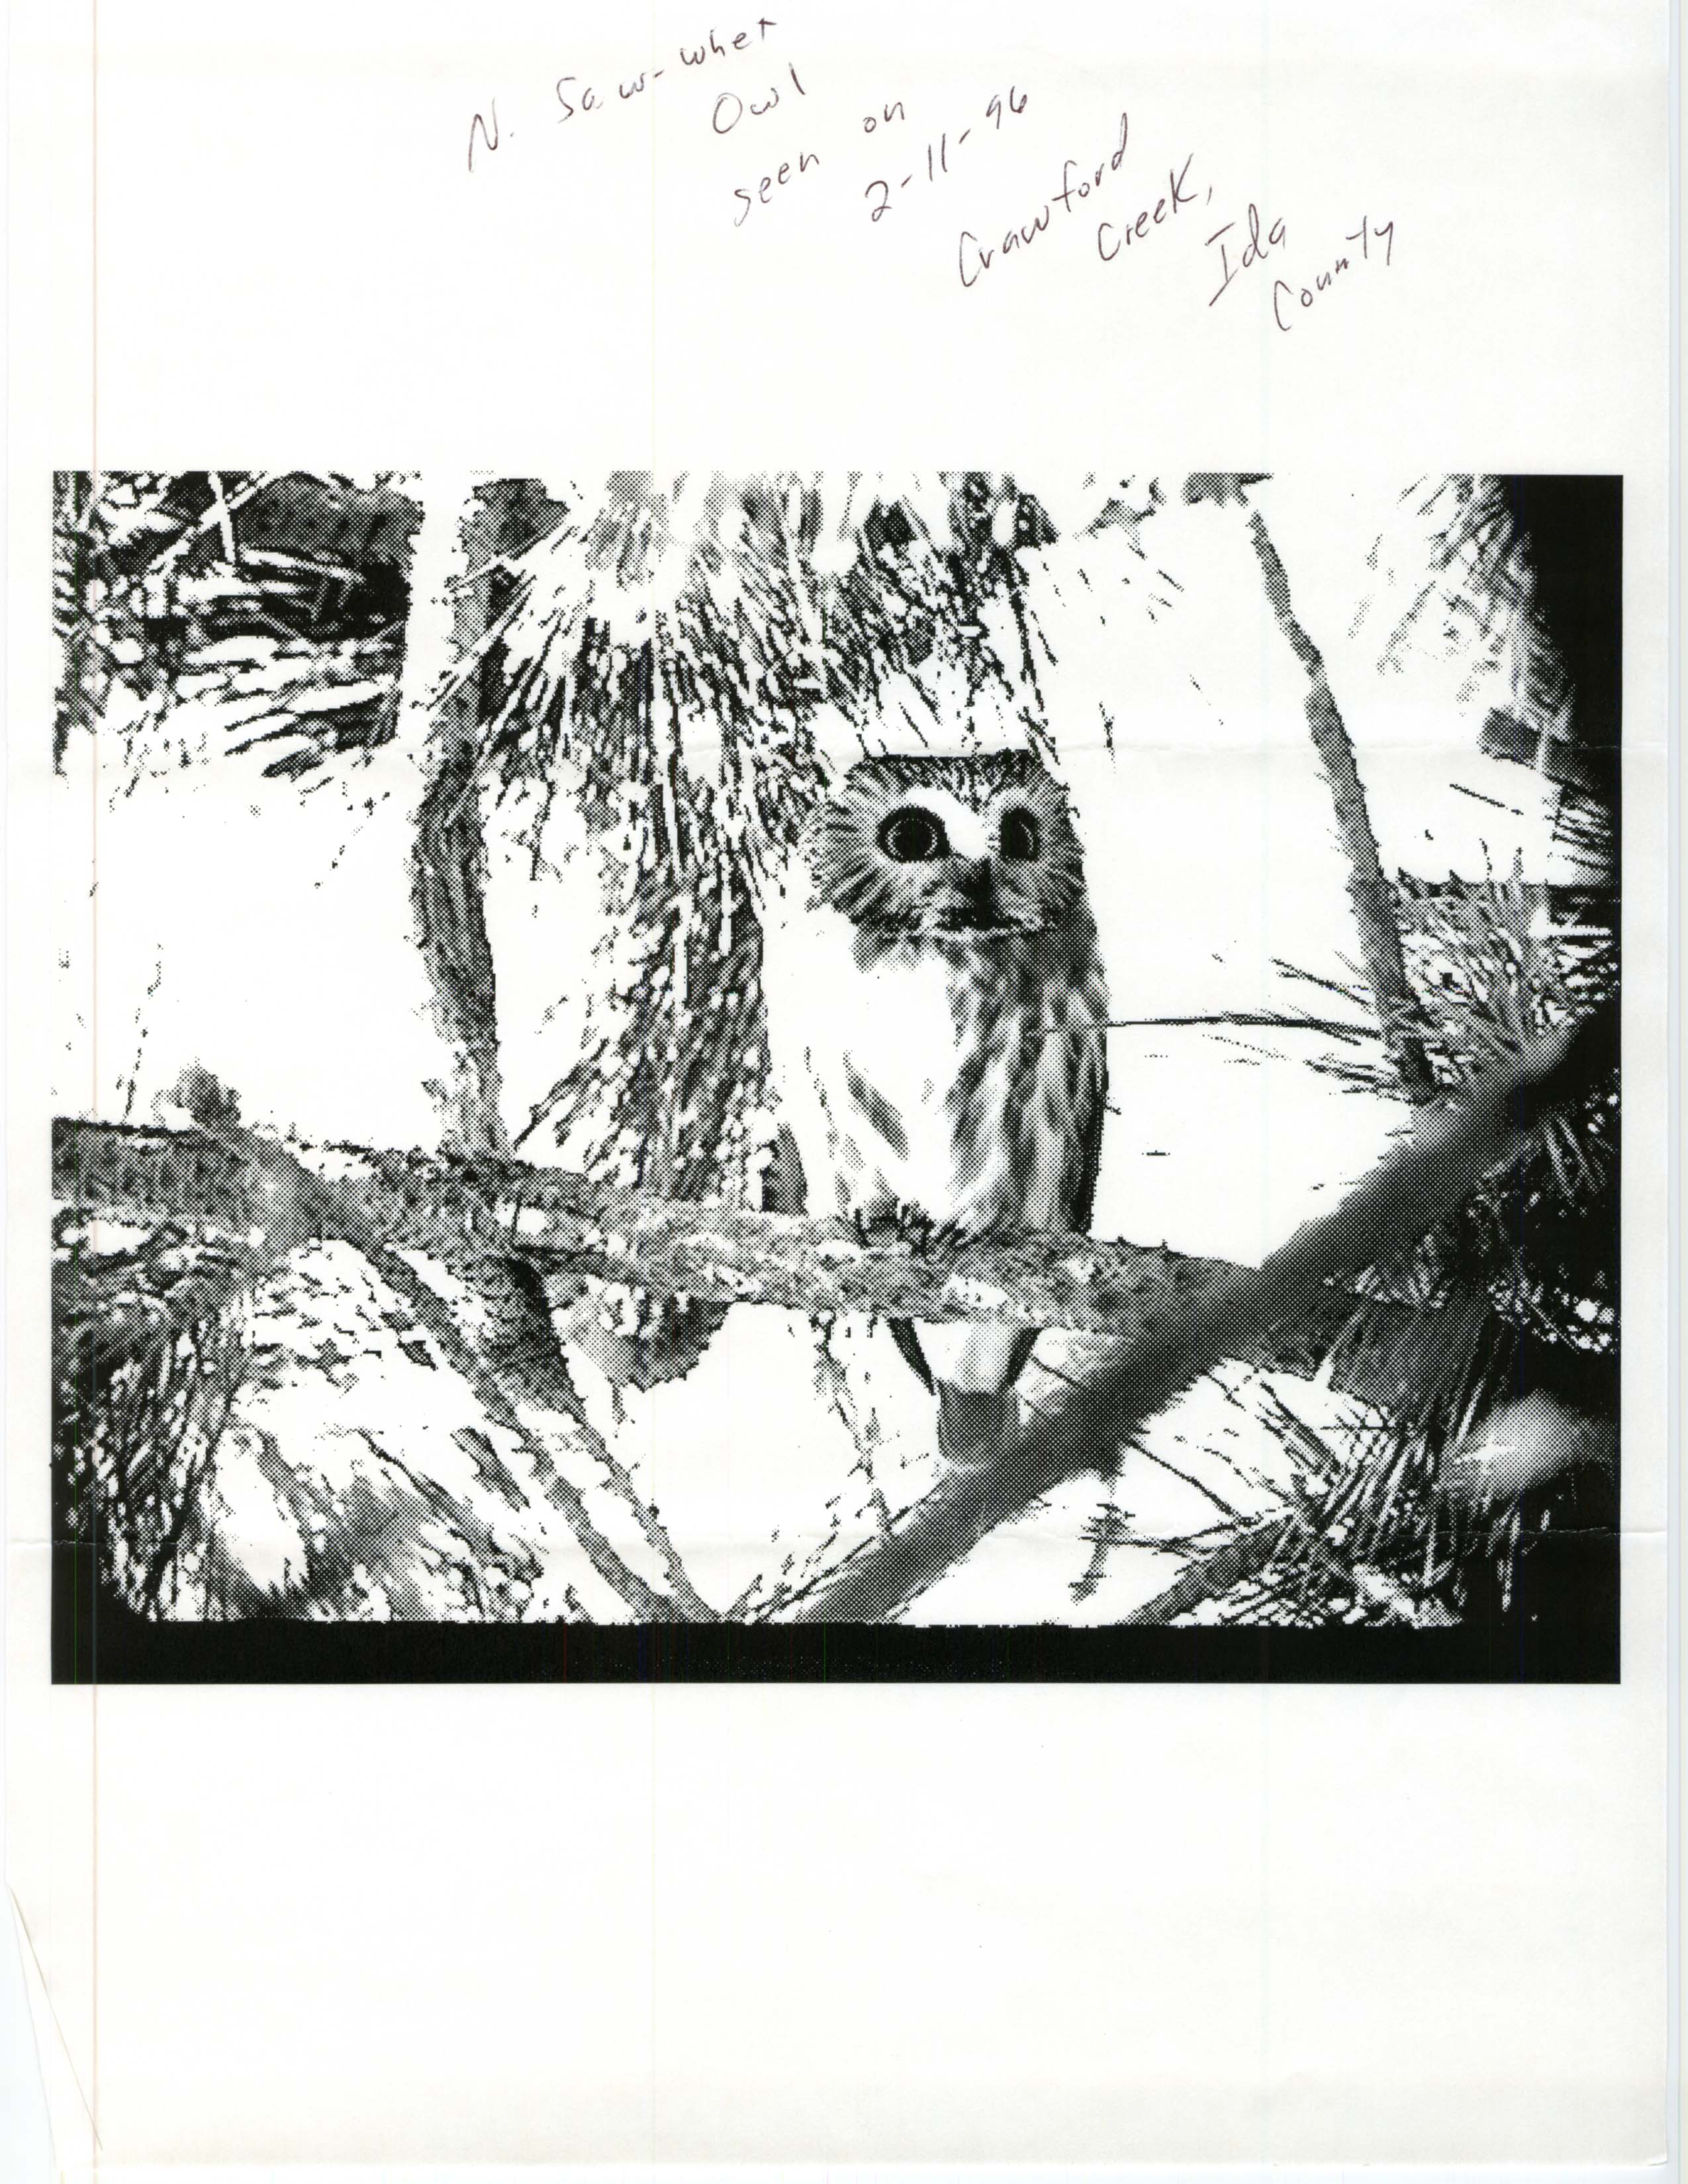 Photograph of Northern Saw-whet Owl, 1996